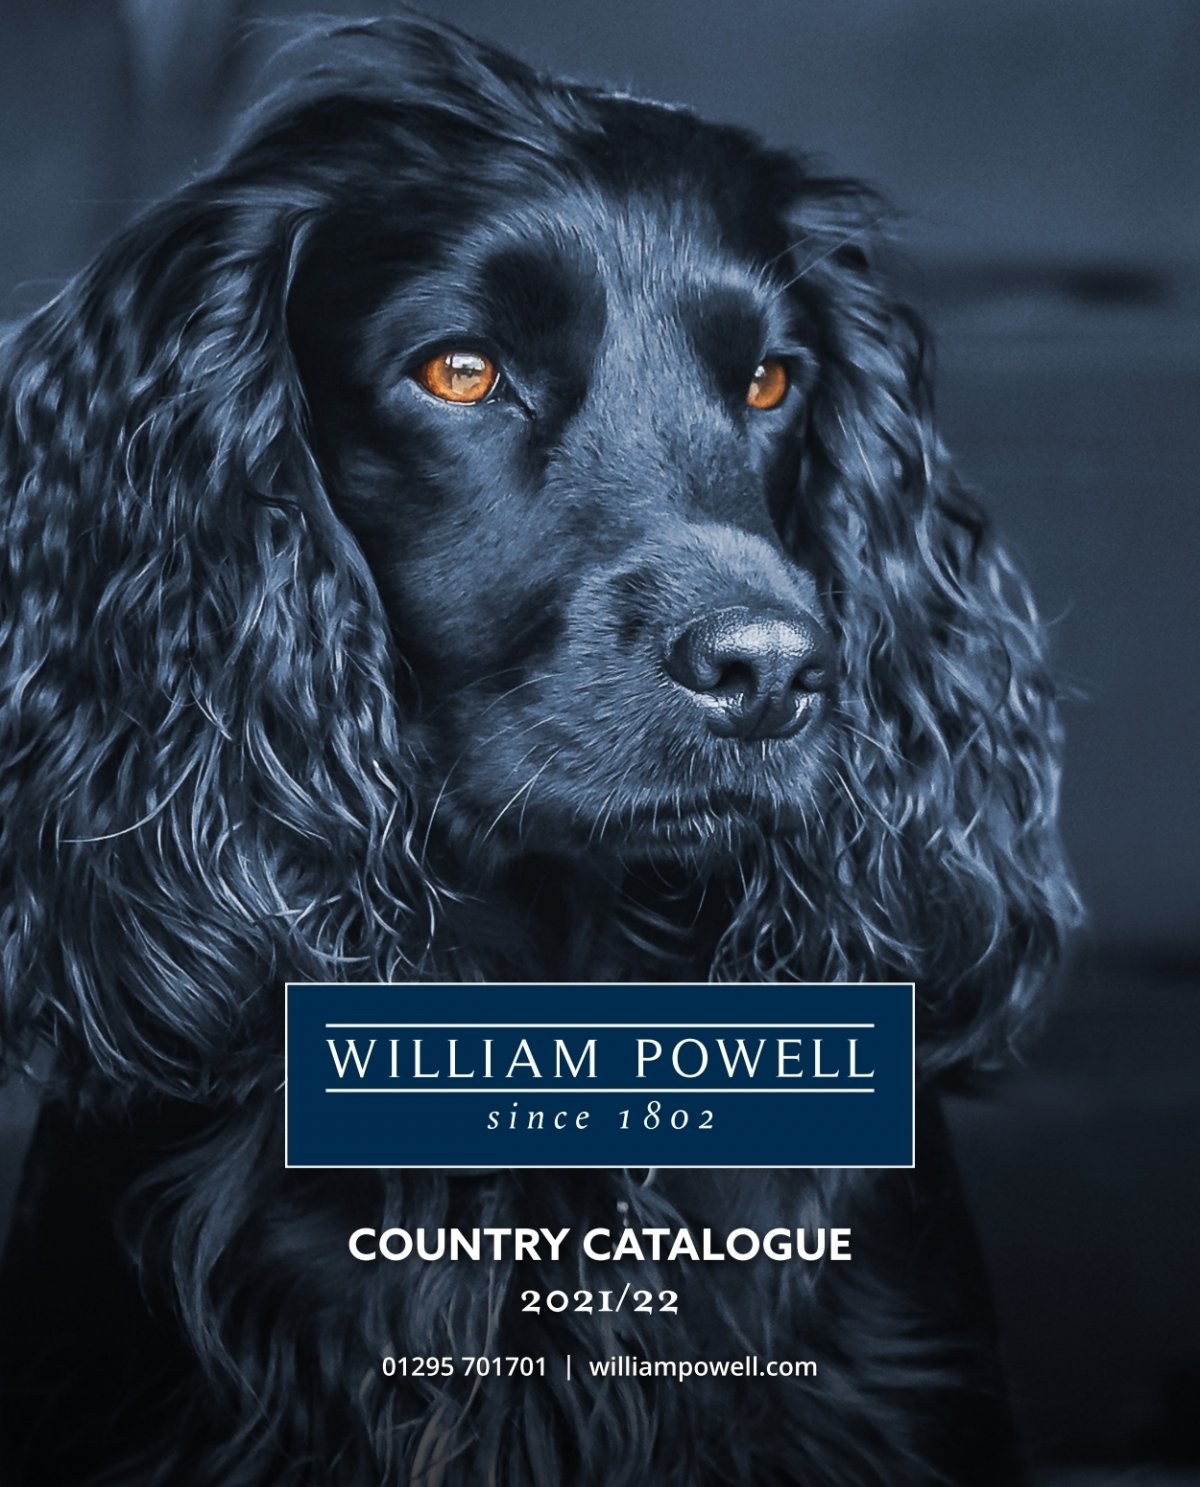 William Powell Country Catalogue 2021/22